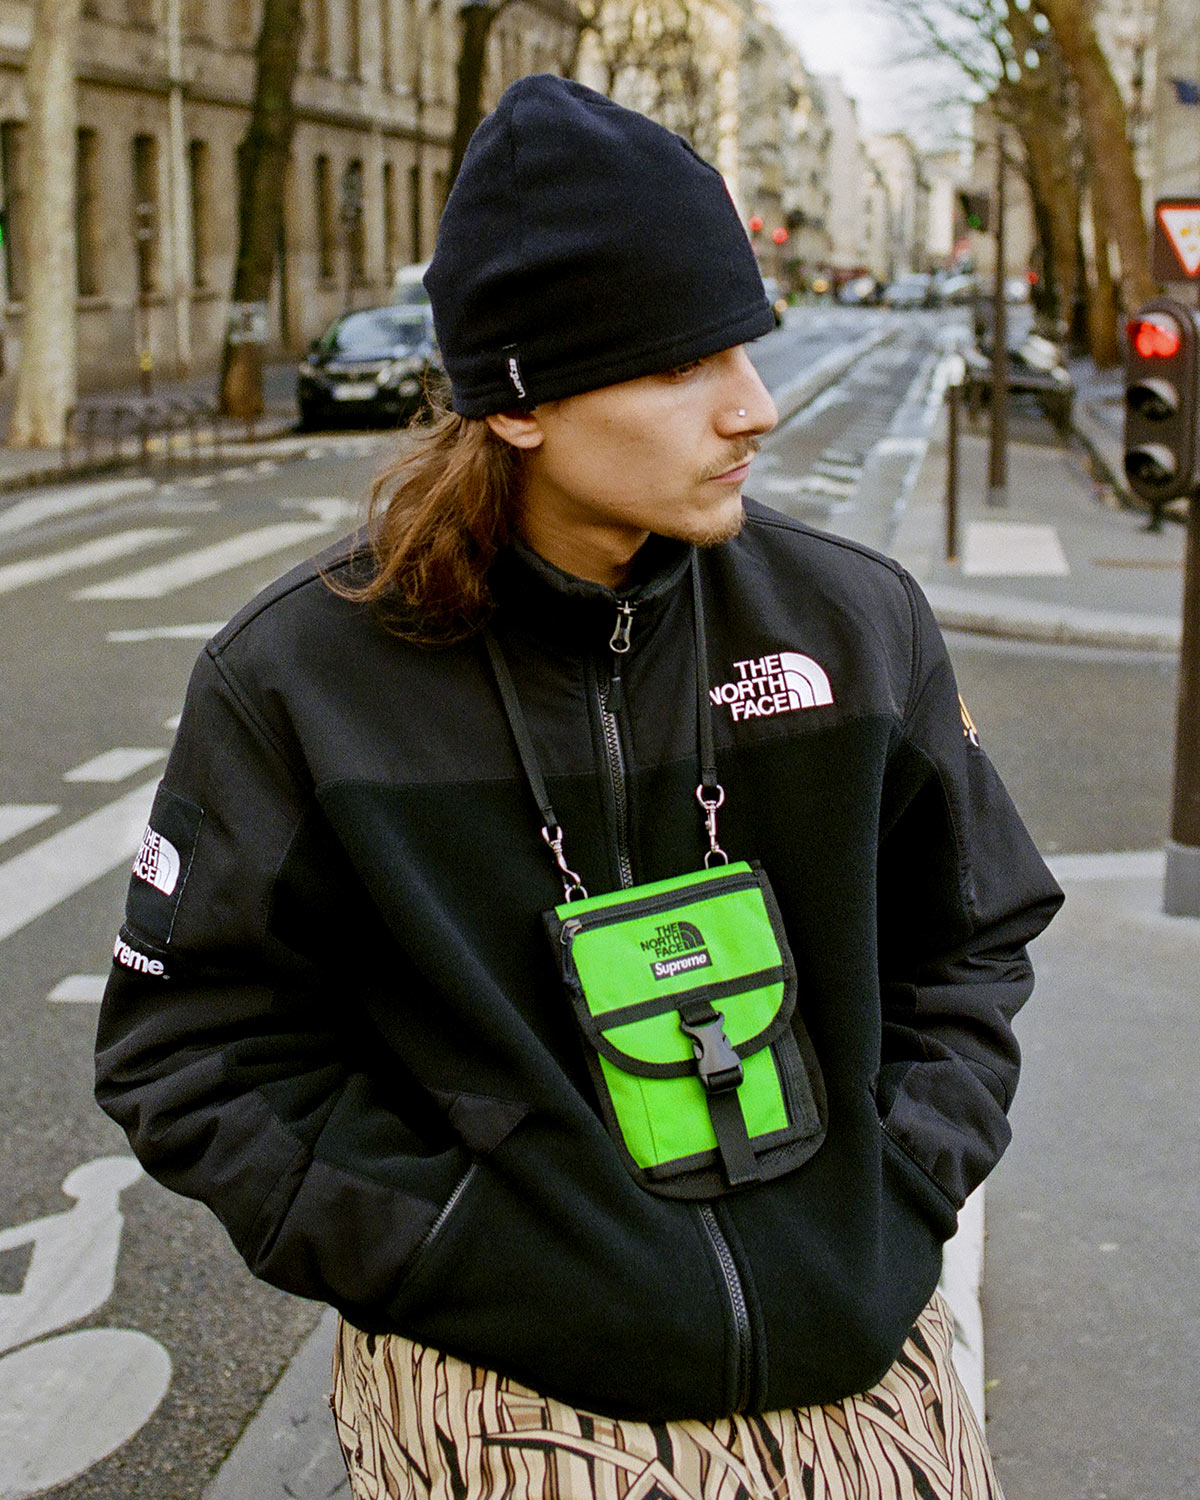 Man Wearing Supreme x The North Face RTG Fleece Jacket in Black With Lime Green Bag